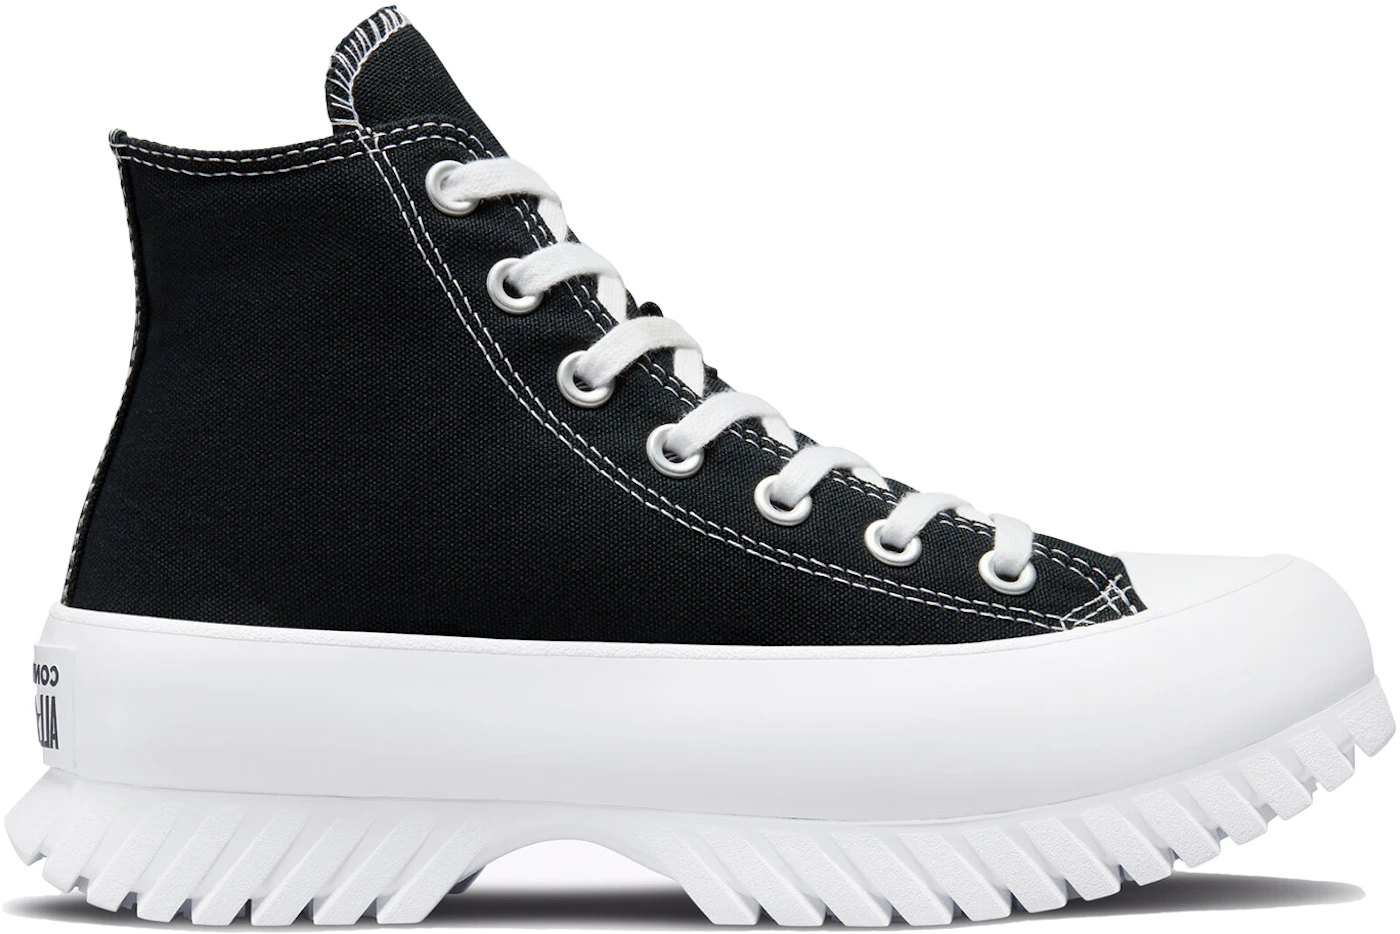 Converse Chuck Taylor All Star Lugged 2.0 Black White - A00870C - US